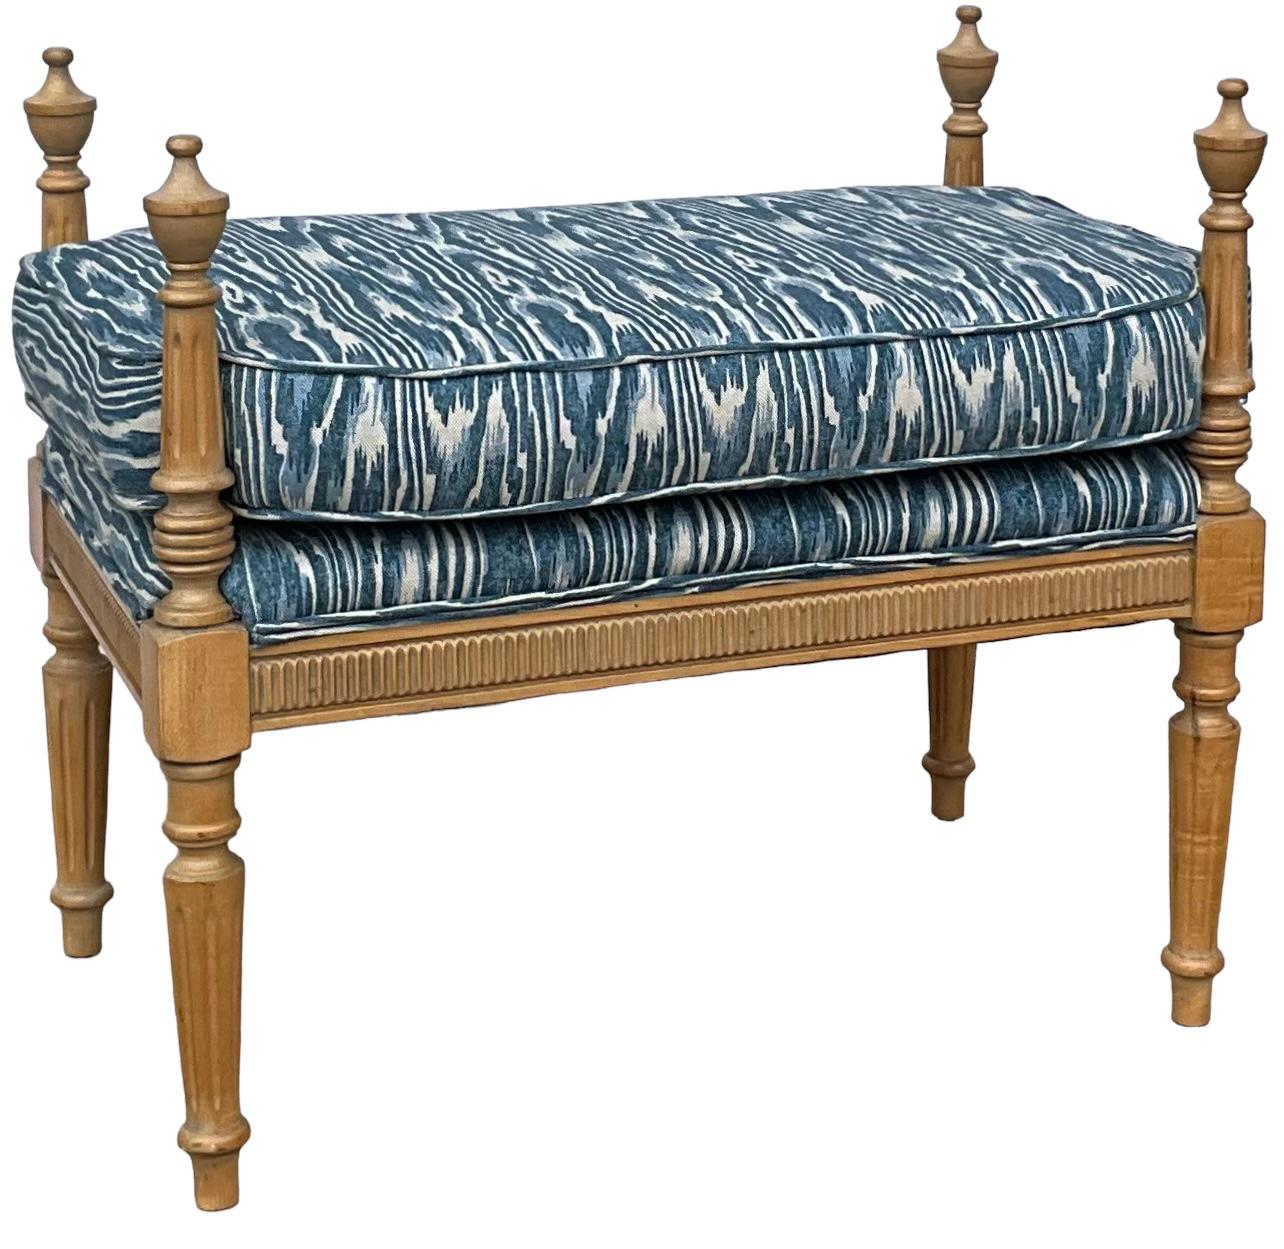 20th Century Gustavian Inspired Cerused Pine Ottomans / Benches Blue Faux Bois Linen - Pair